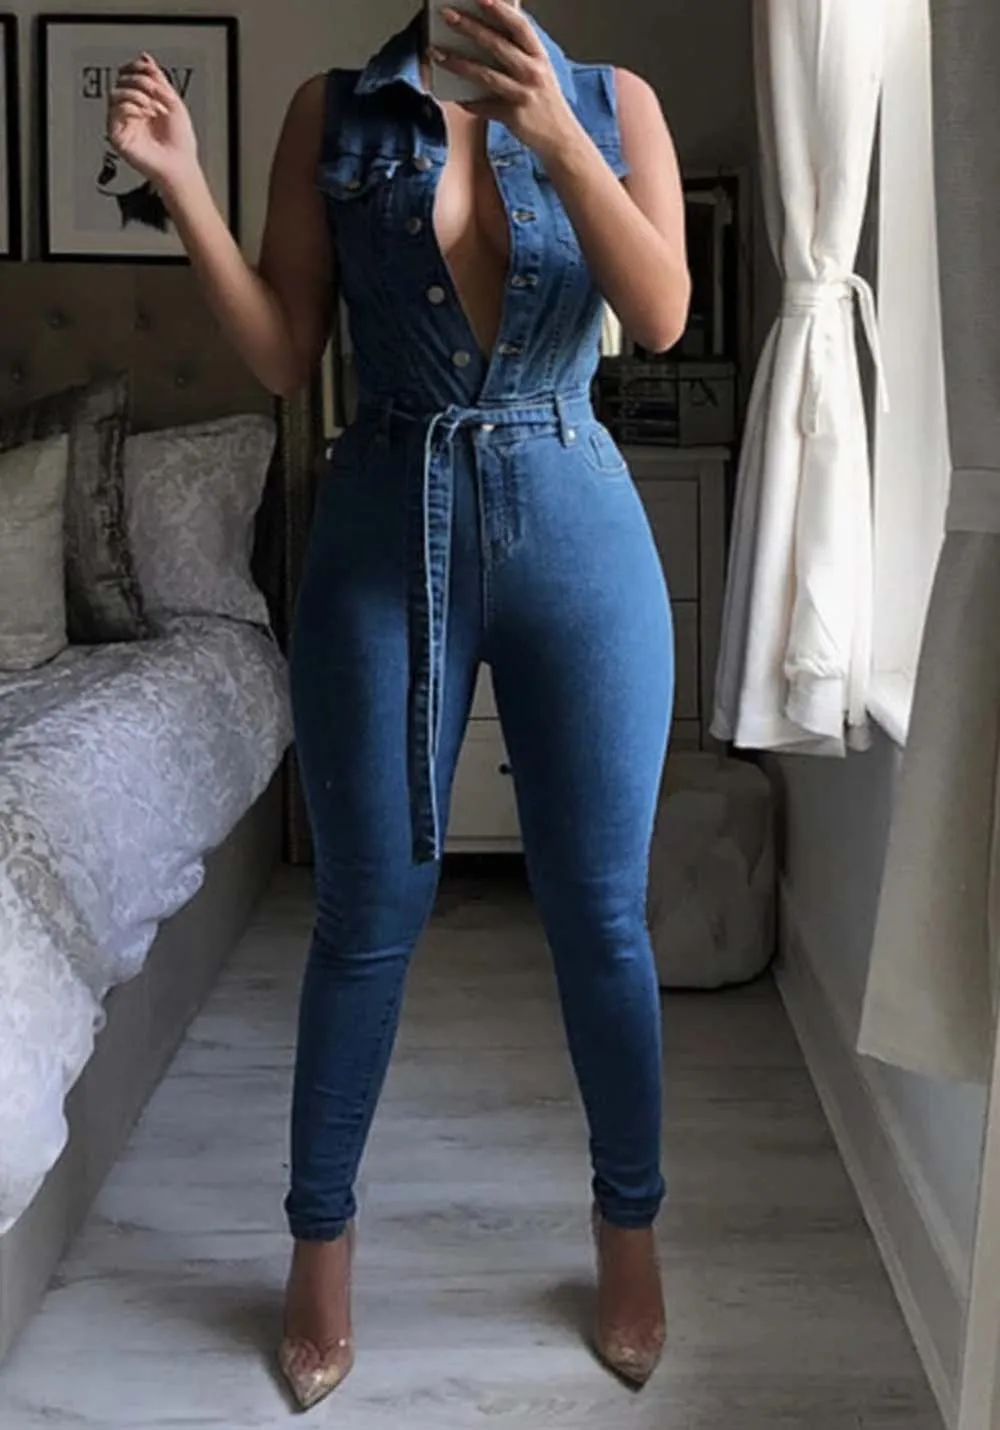 

Woman Blue Summer Sexy Demin Jumpsuit Girls Sleevelss Jeans Casual Overalls Romper Bodycon Playsuit One Piece Pant